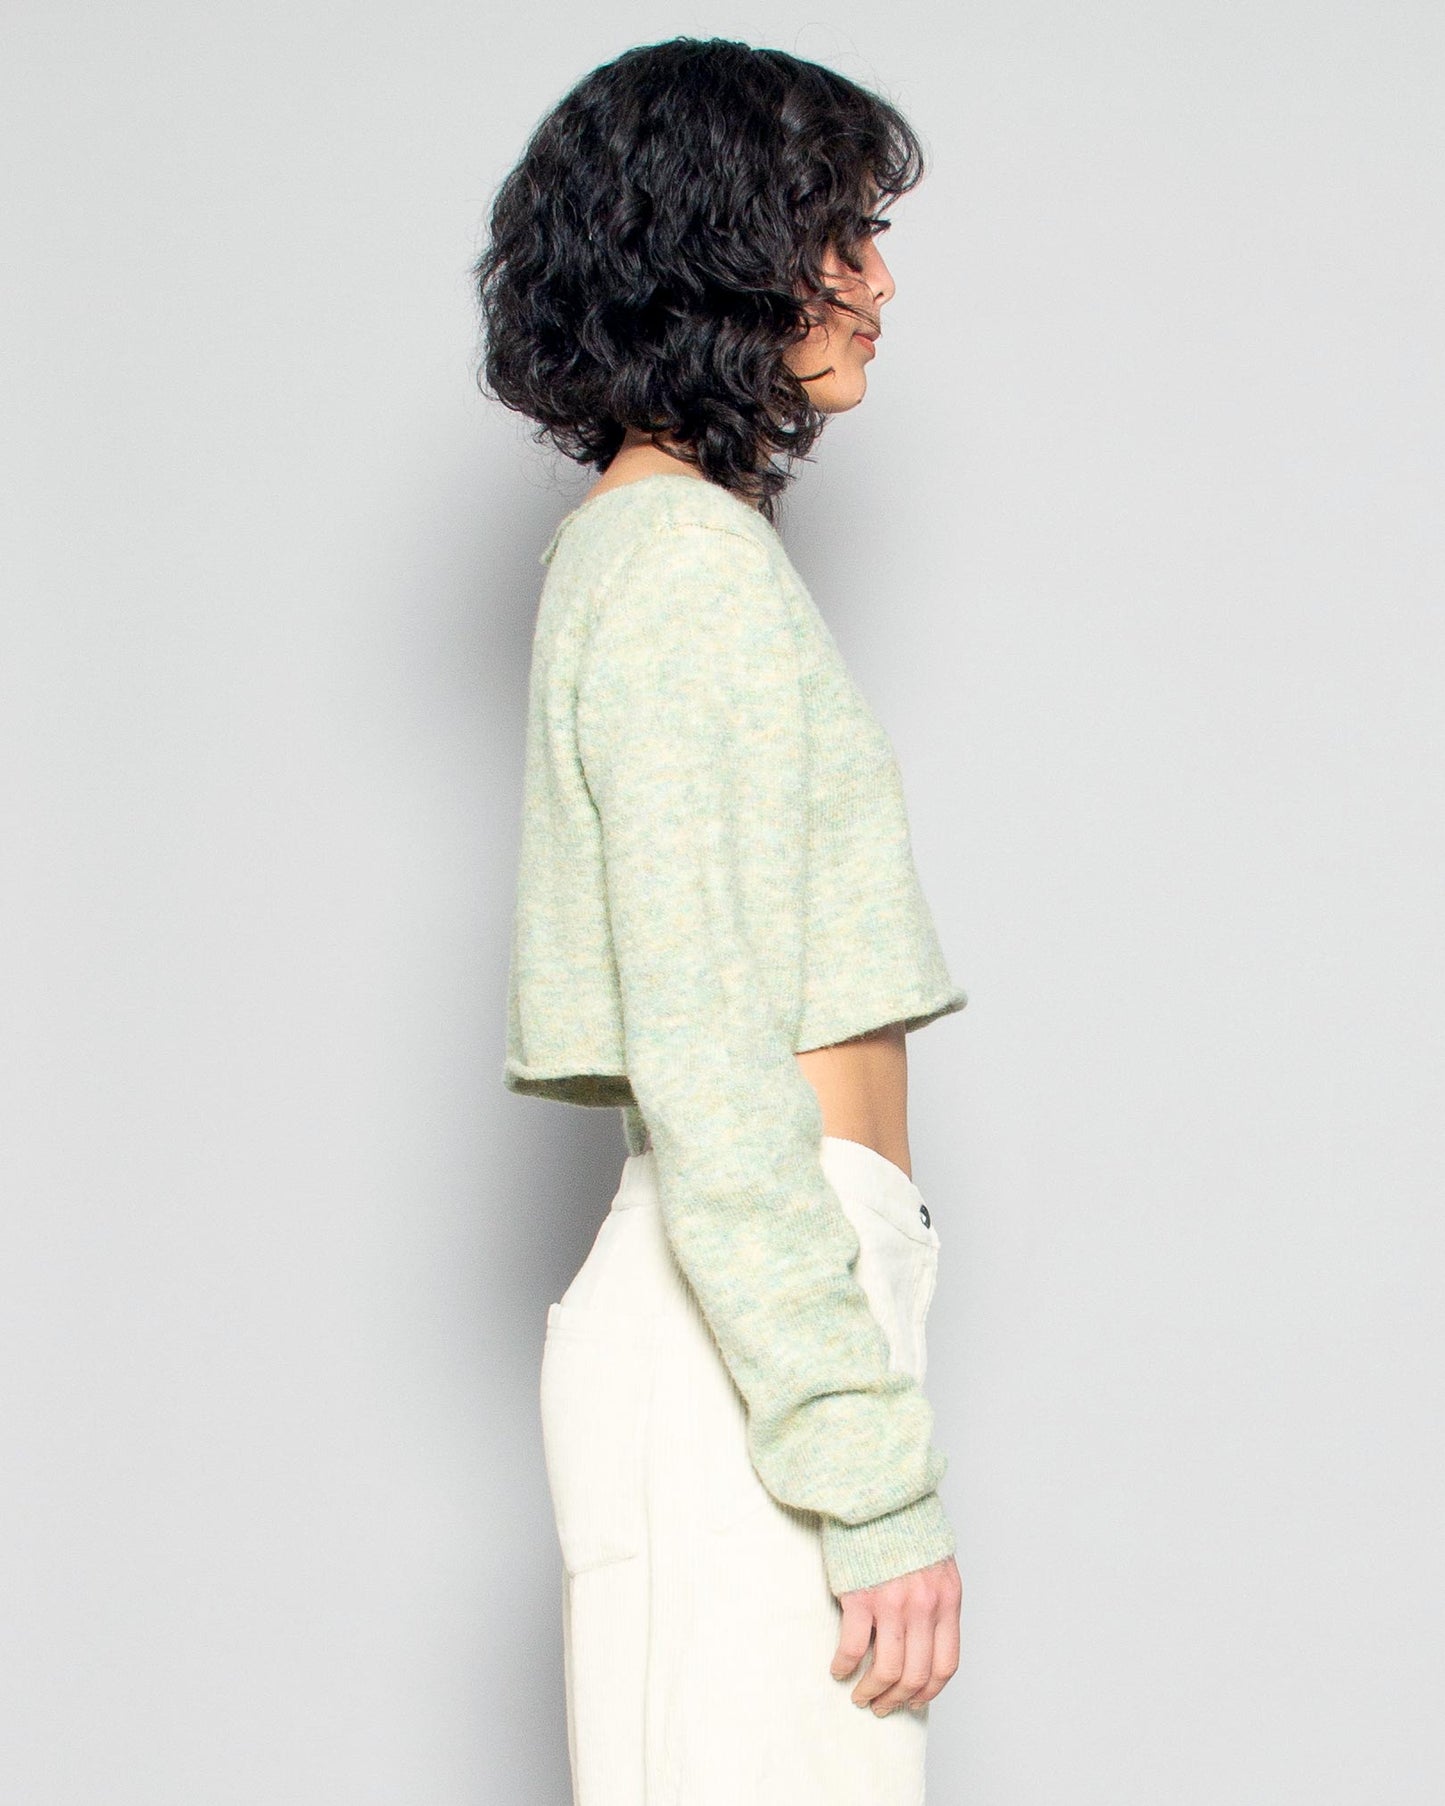 PERSONS Aria Cropped Sweater in Matcha available at Lahn.shop